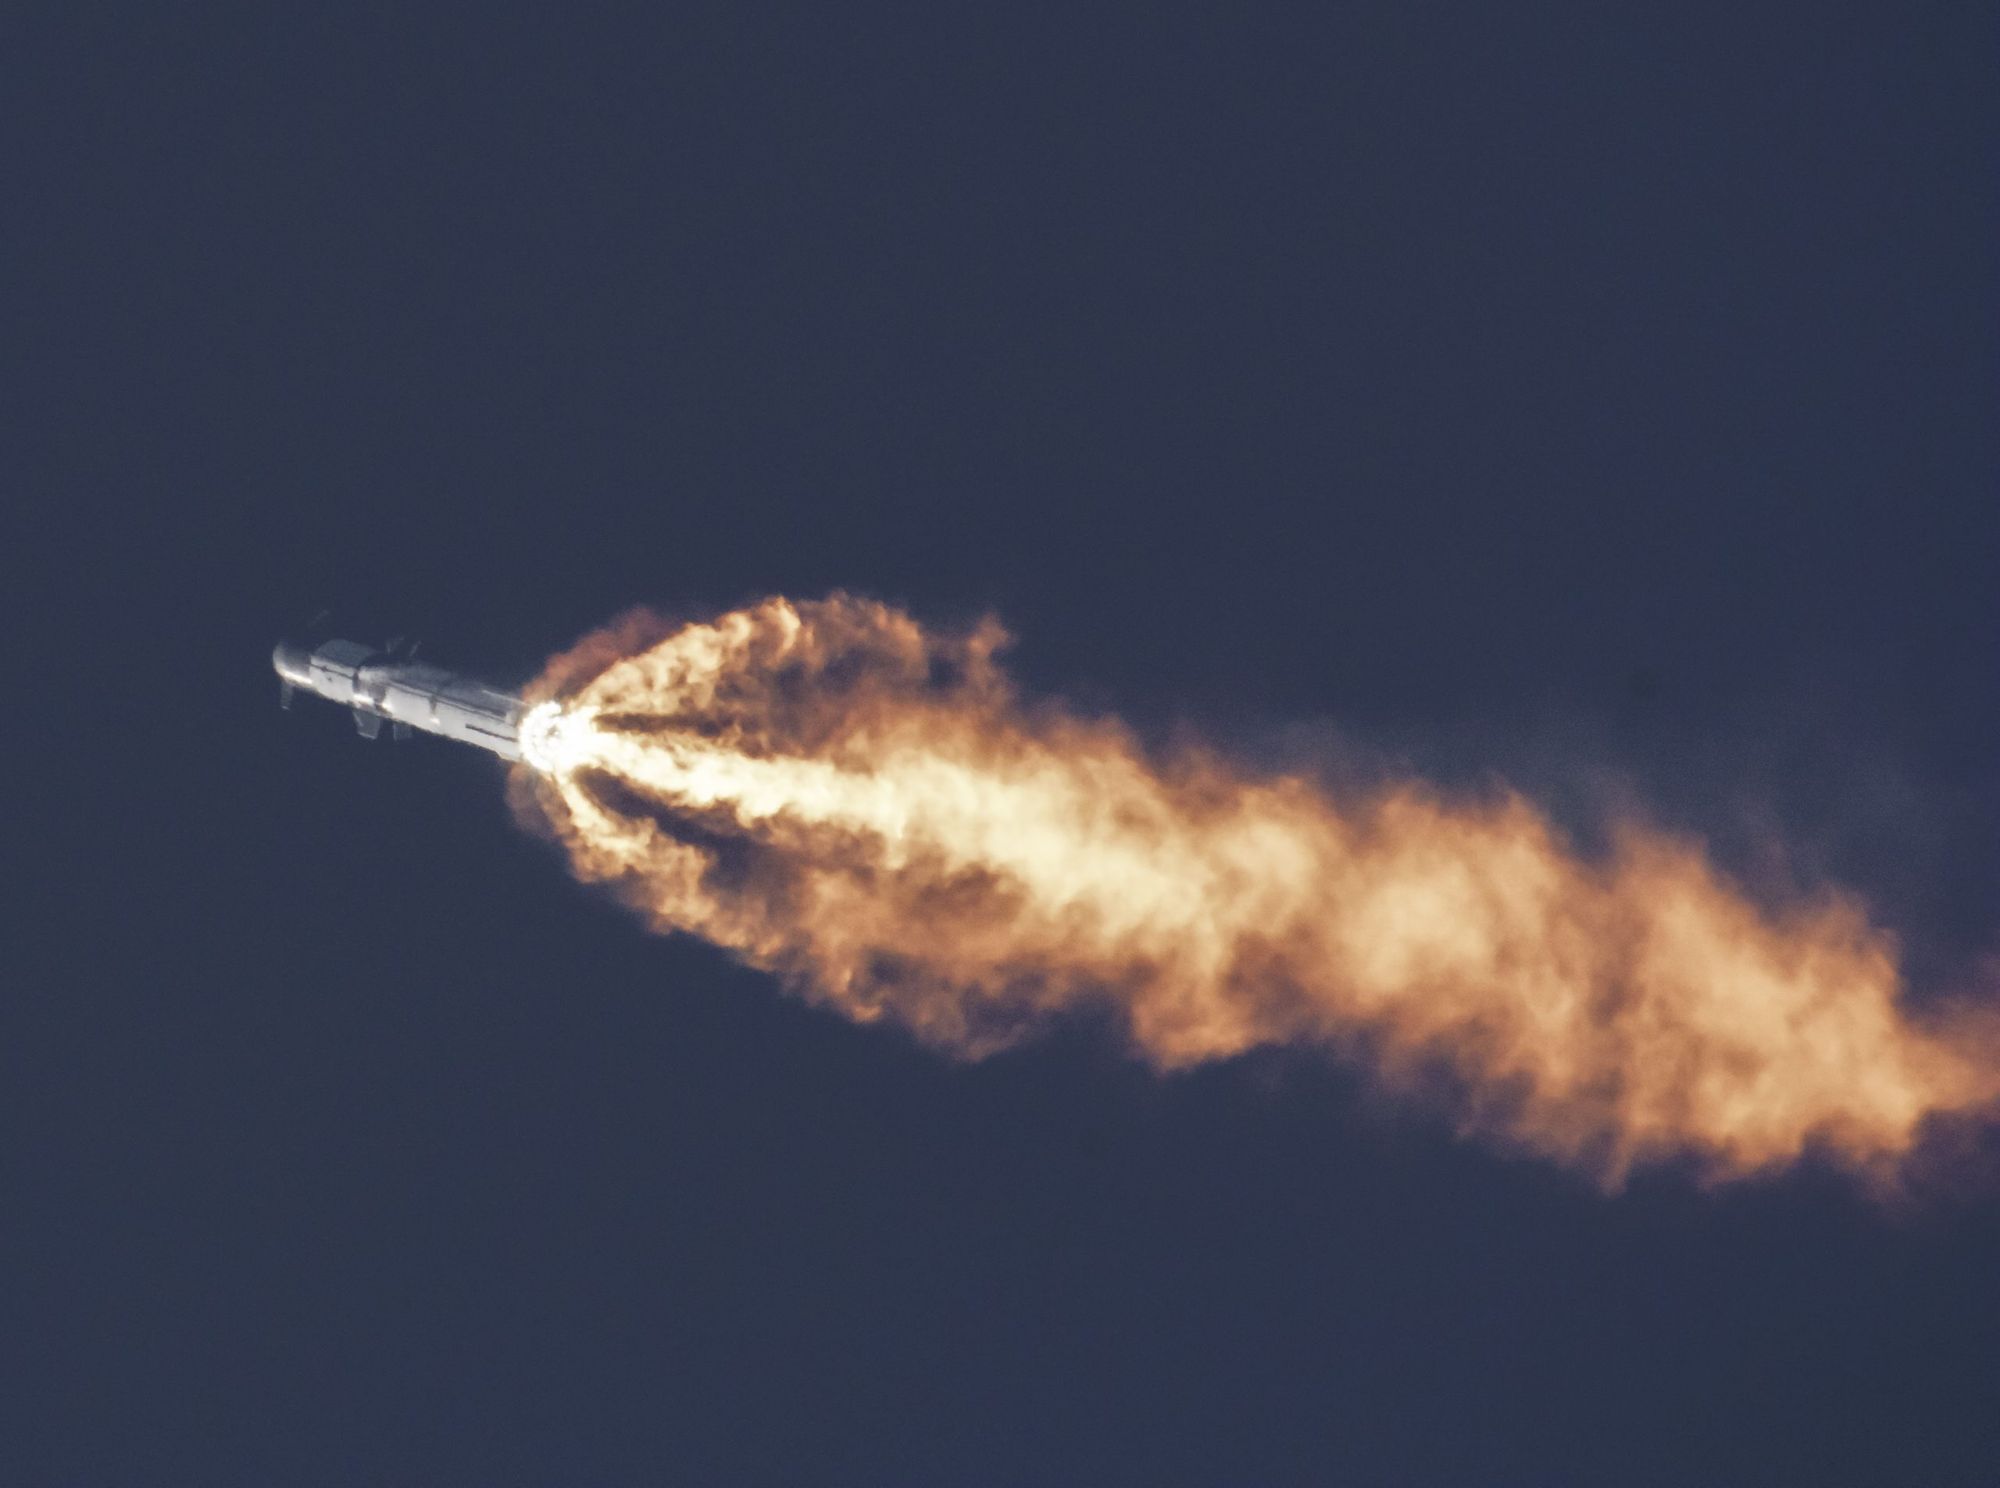 SpaceX's Starship lifts off on epic test flight, then explodes in 'rapid unscheduled disassembly'